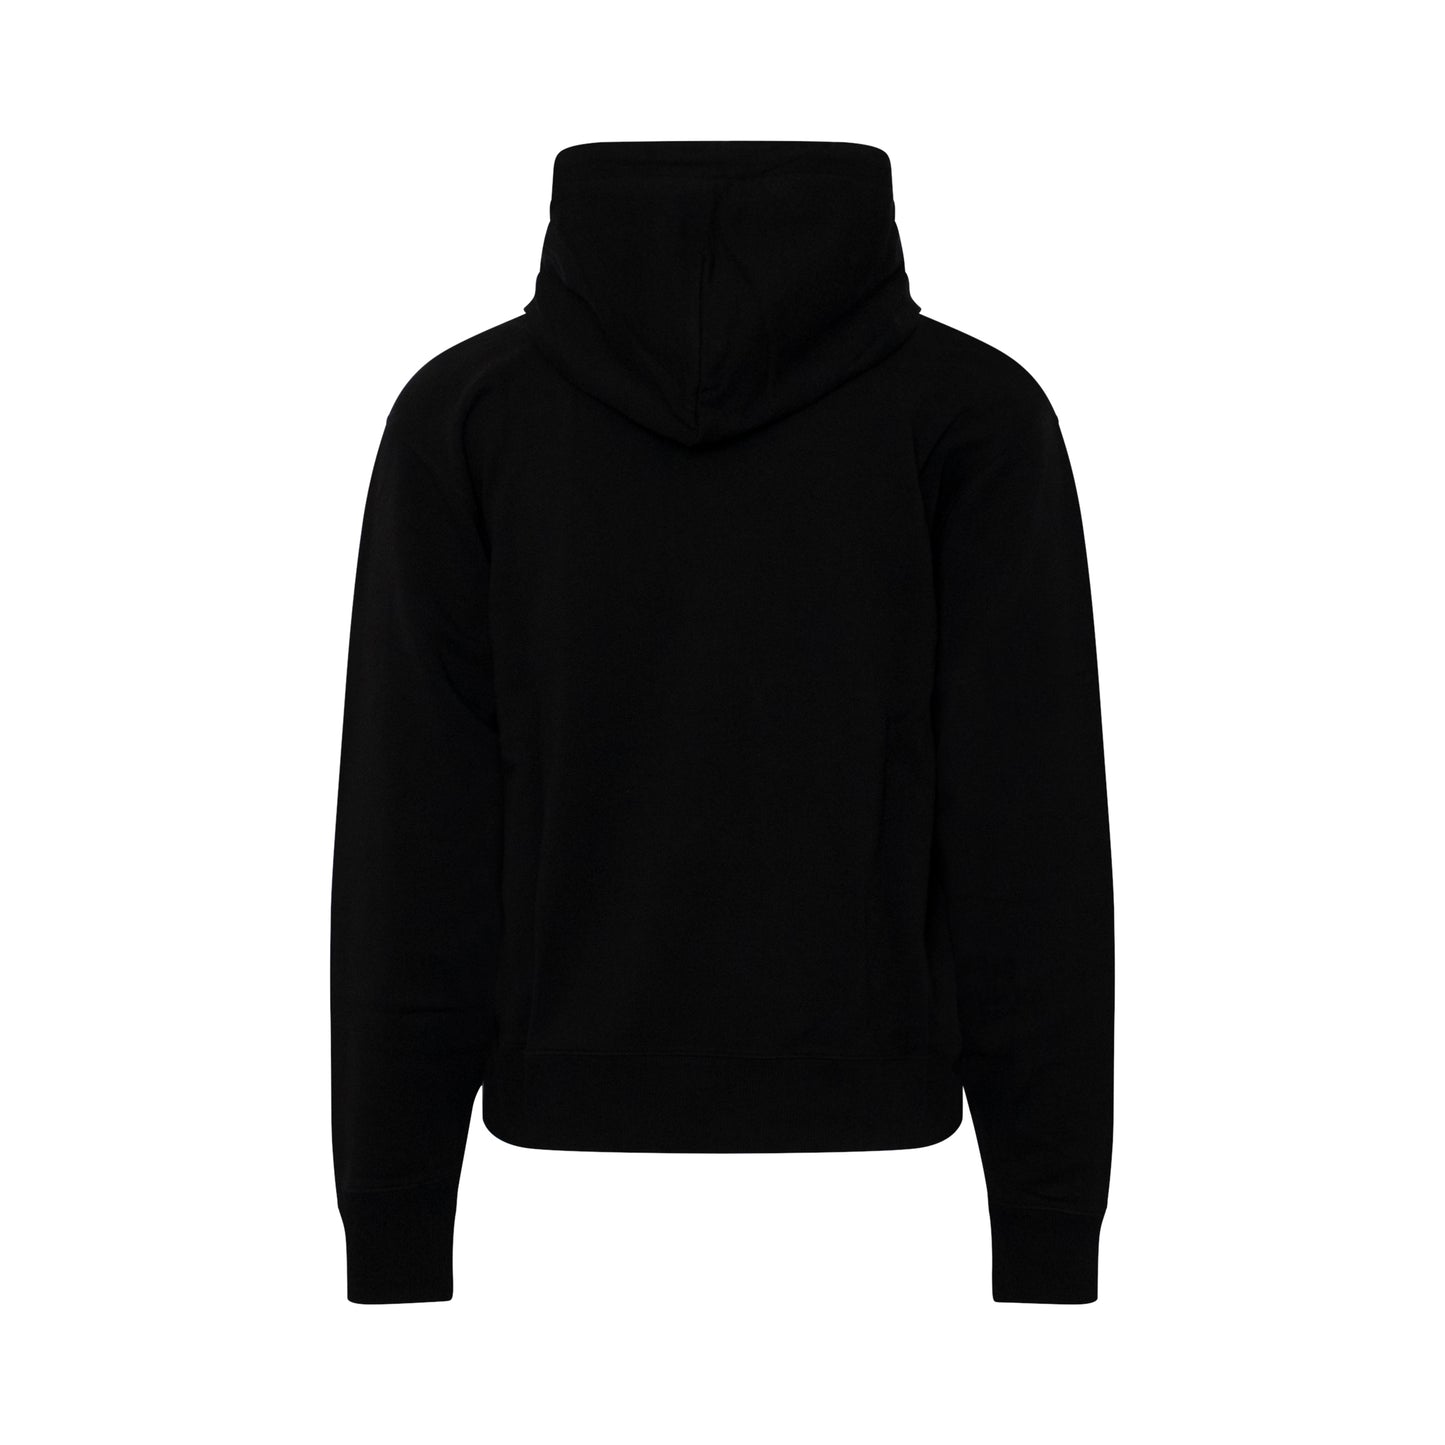 Kenzo Classic Tiger Hoodie in Black Colour